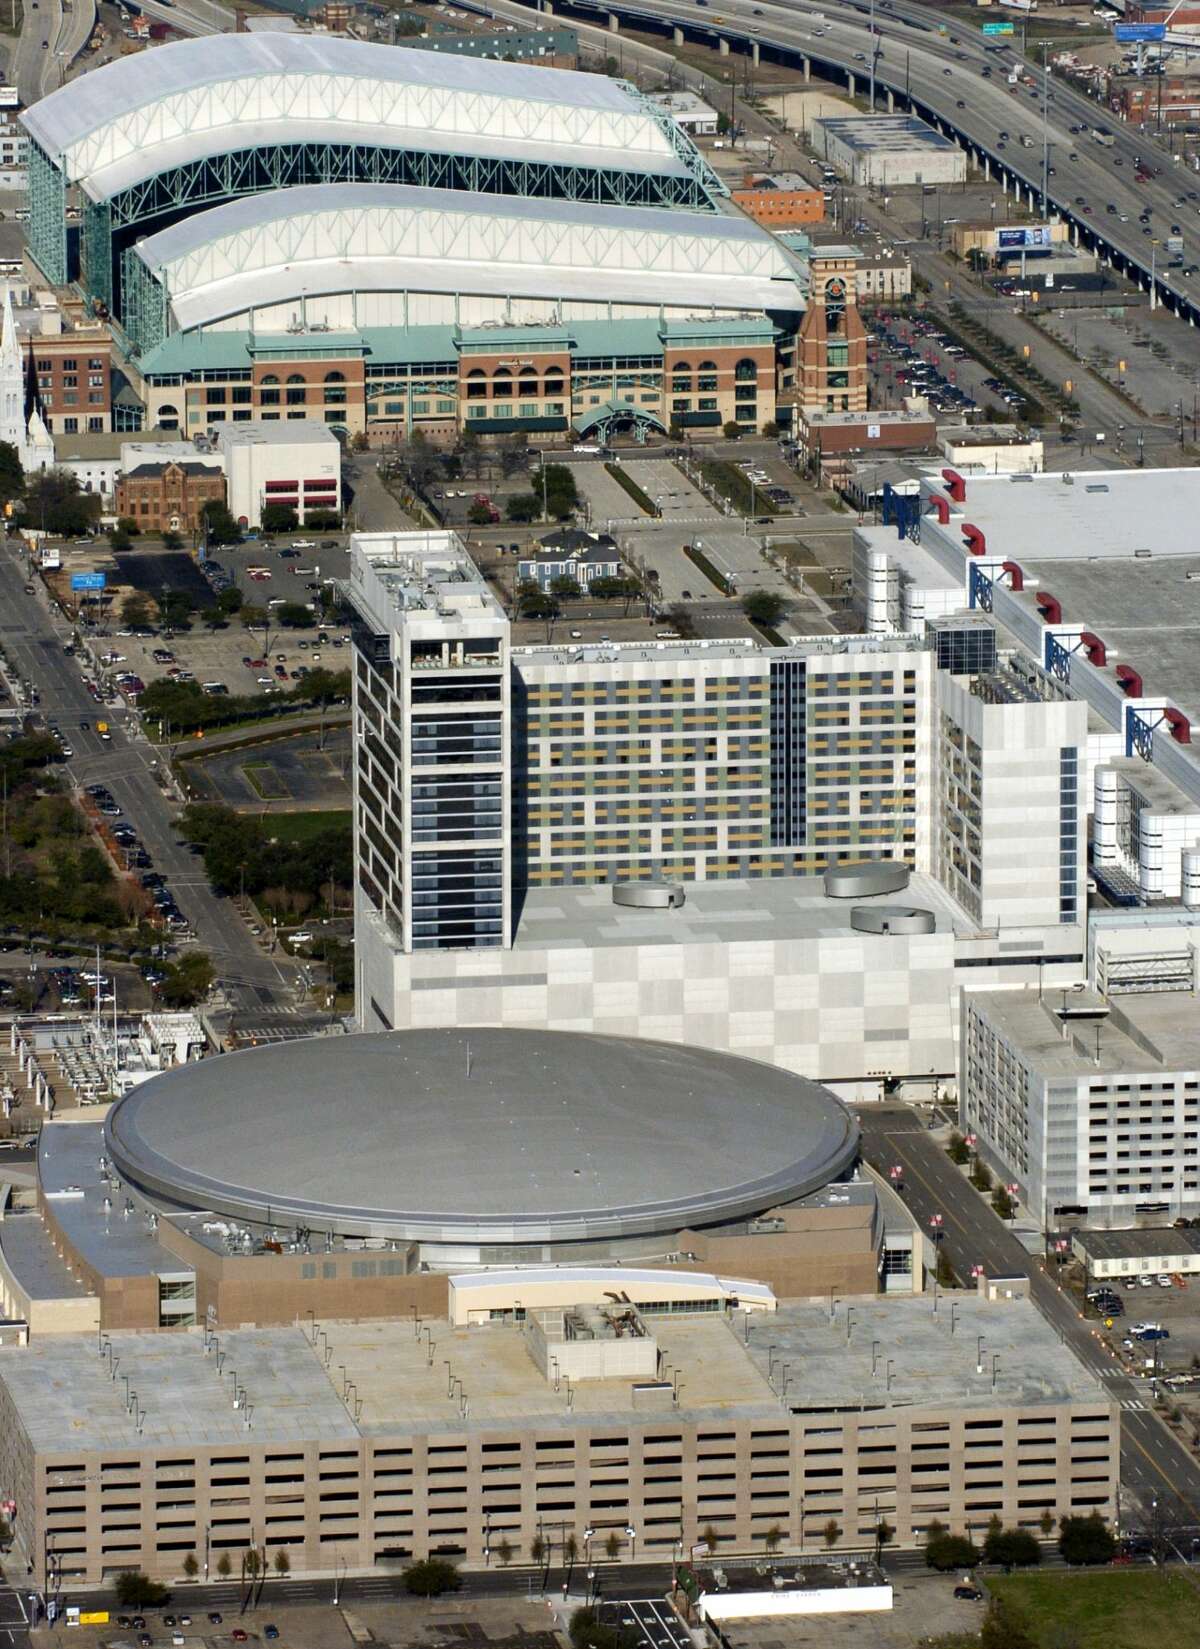 The Toyota Center (foreground) the Hilton Americas Houston and new addition to the George R. Brown Convention Center (center) and Minute Maid Field (with shiny white roof - back) along the east side of downtown. 1/19/2004 (Karl Stolleis/Houston Chronicle) HOUCHRON CAPTION (10/10/2004) SECOUTLOOK COLORFRONT: ROOM GLUT: A proposal to turn the Astrodome into a convention center hotel could threaten the viability of the Hilton Americas Houston Hotel, say some observers.